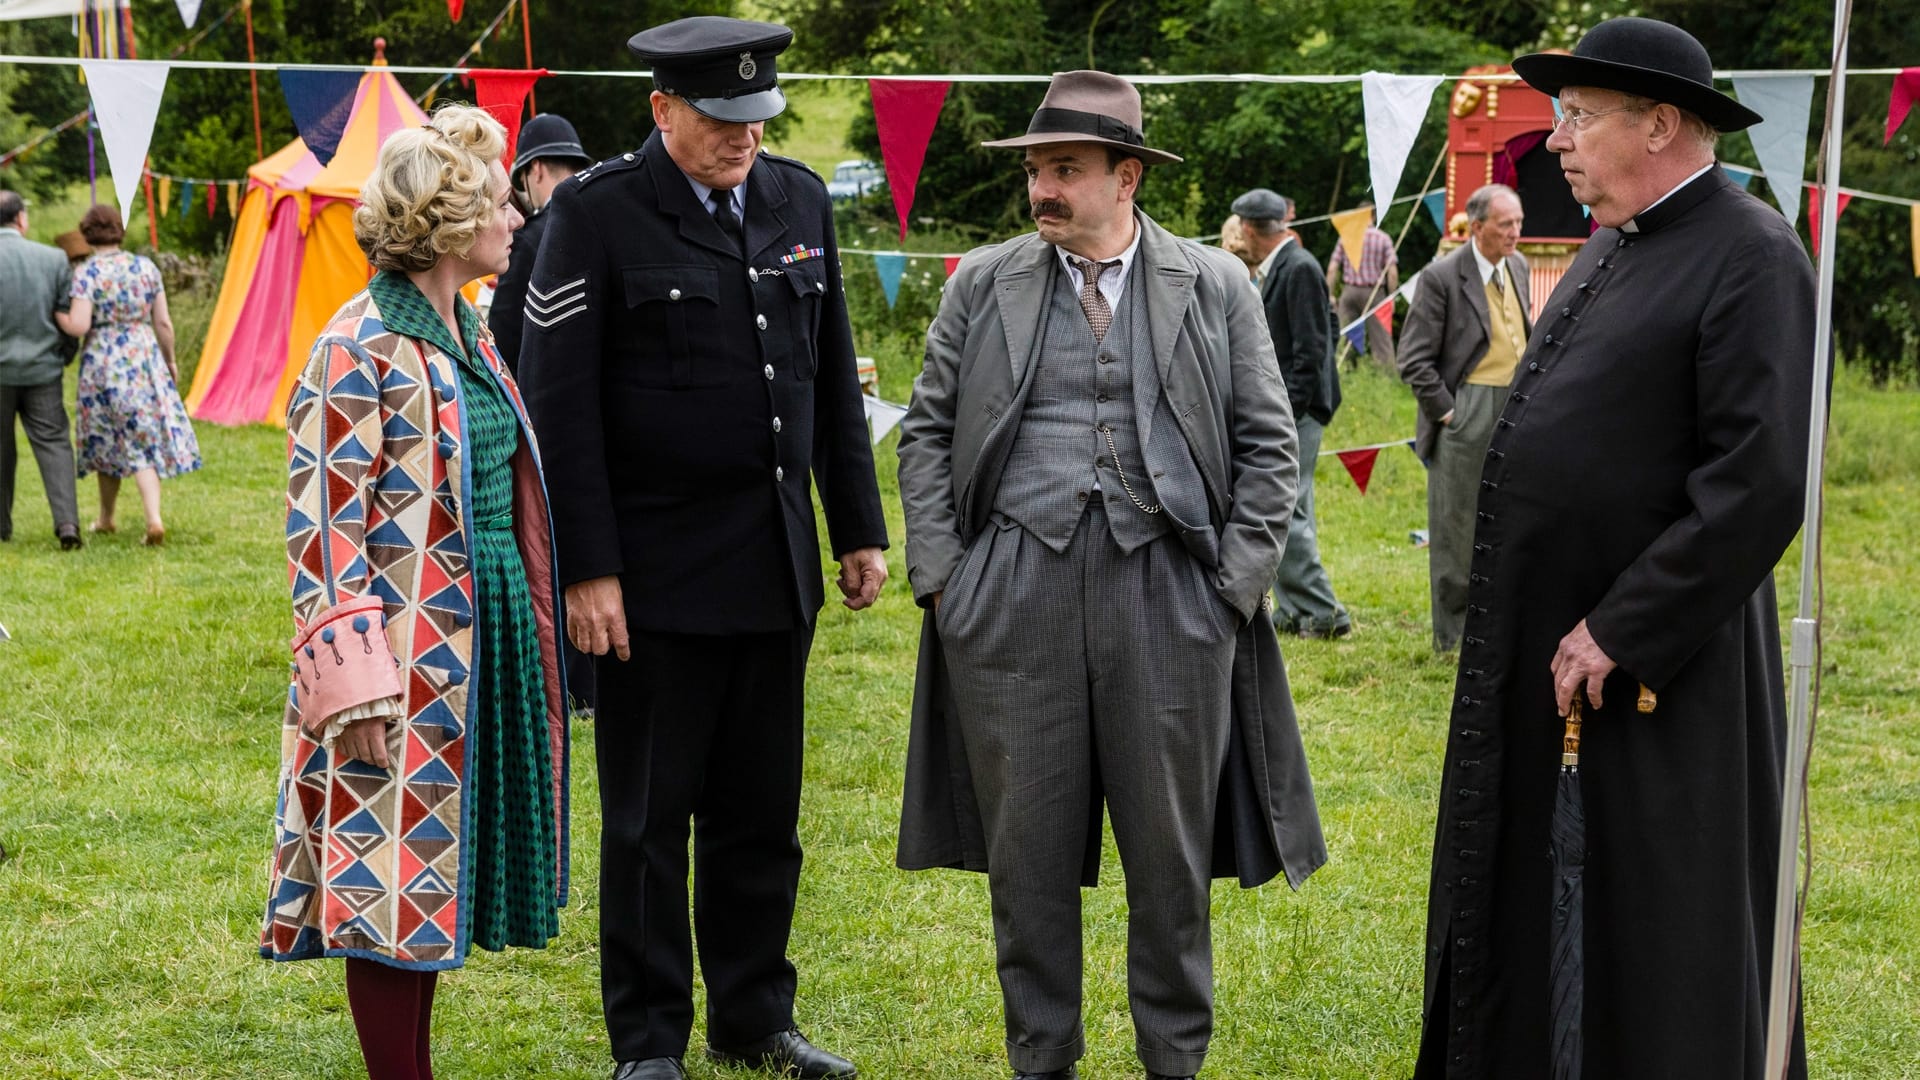 Father Brown - Season 8 Episode 4 : The Wisdom of the Fool